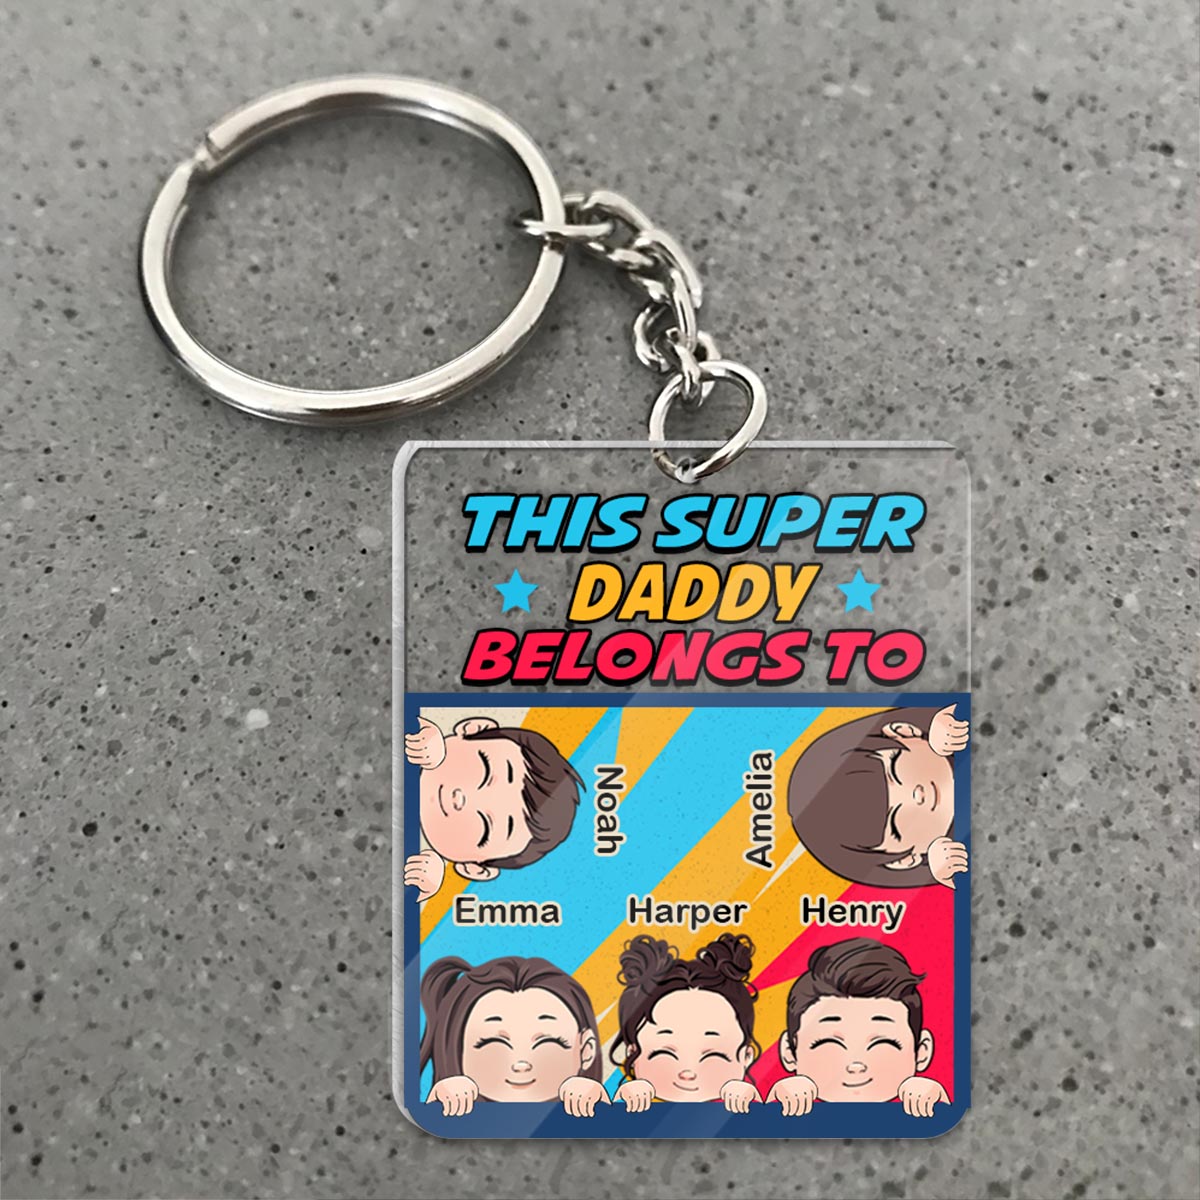 Annoy You For The Foreseeable Future - Personalized Father's Day Father Transparent Keychain